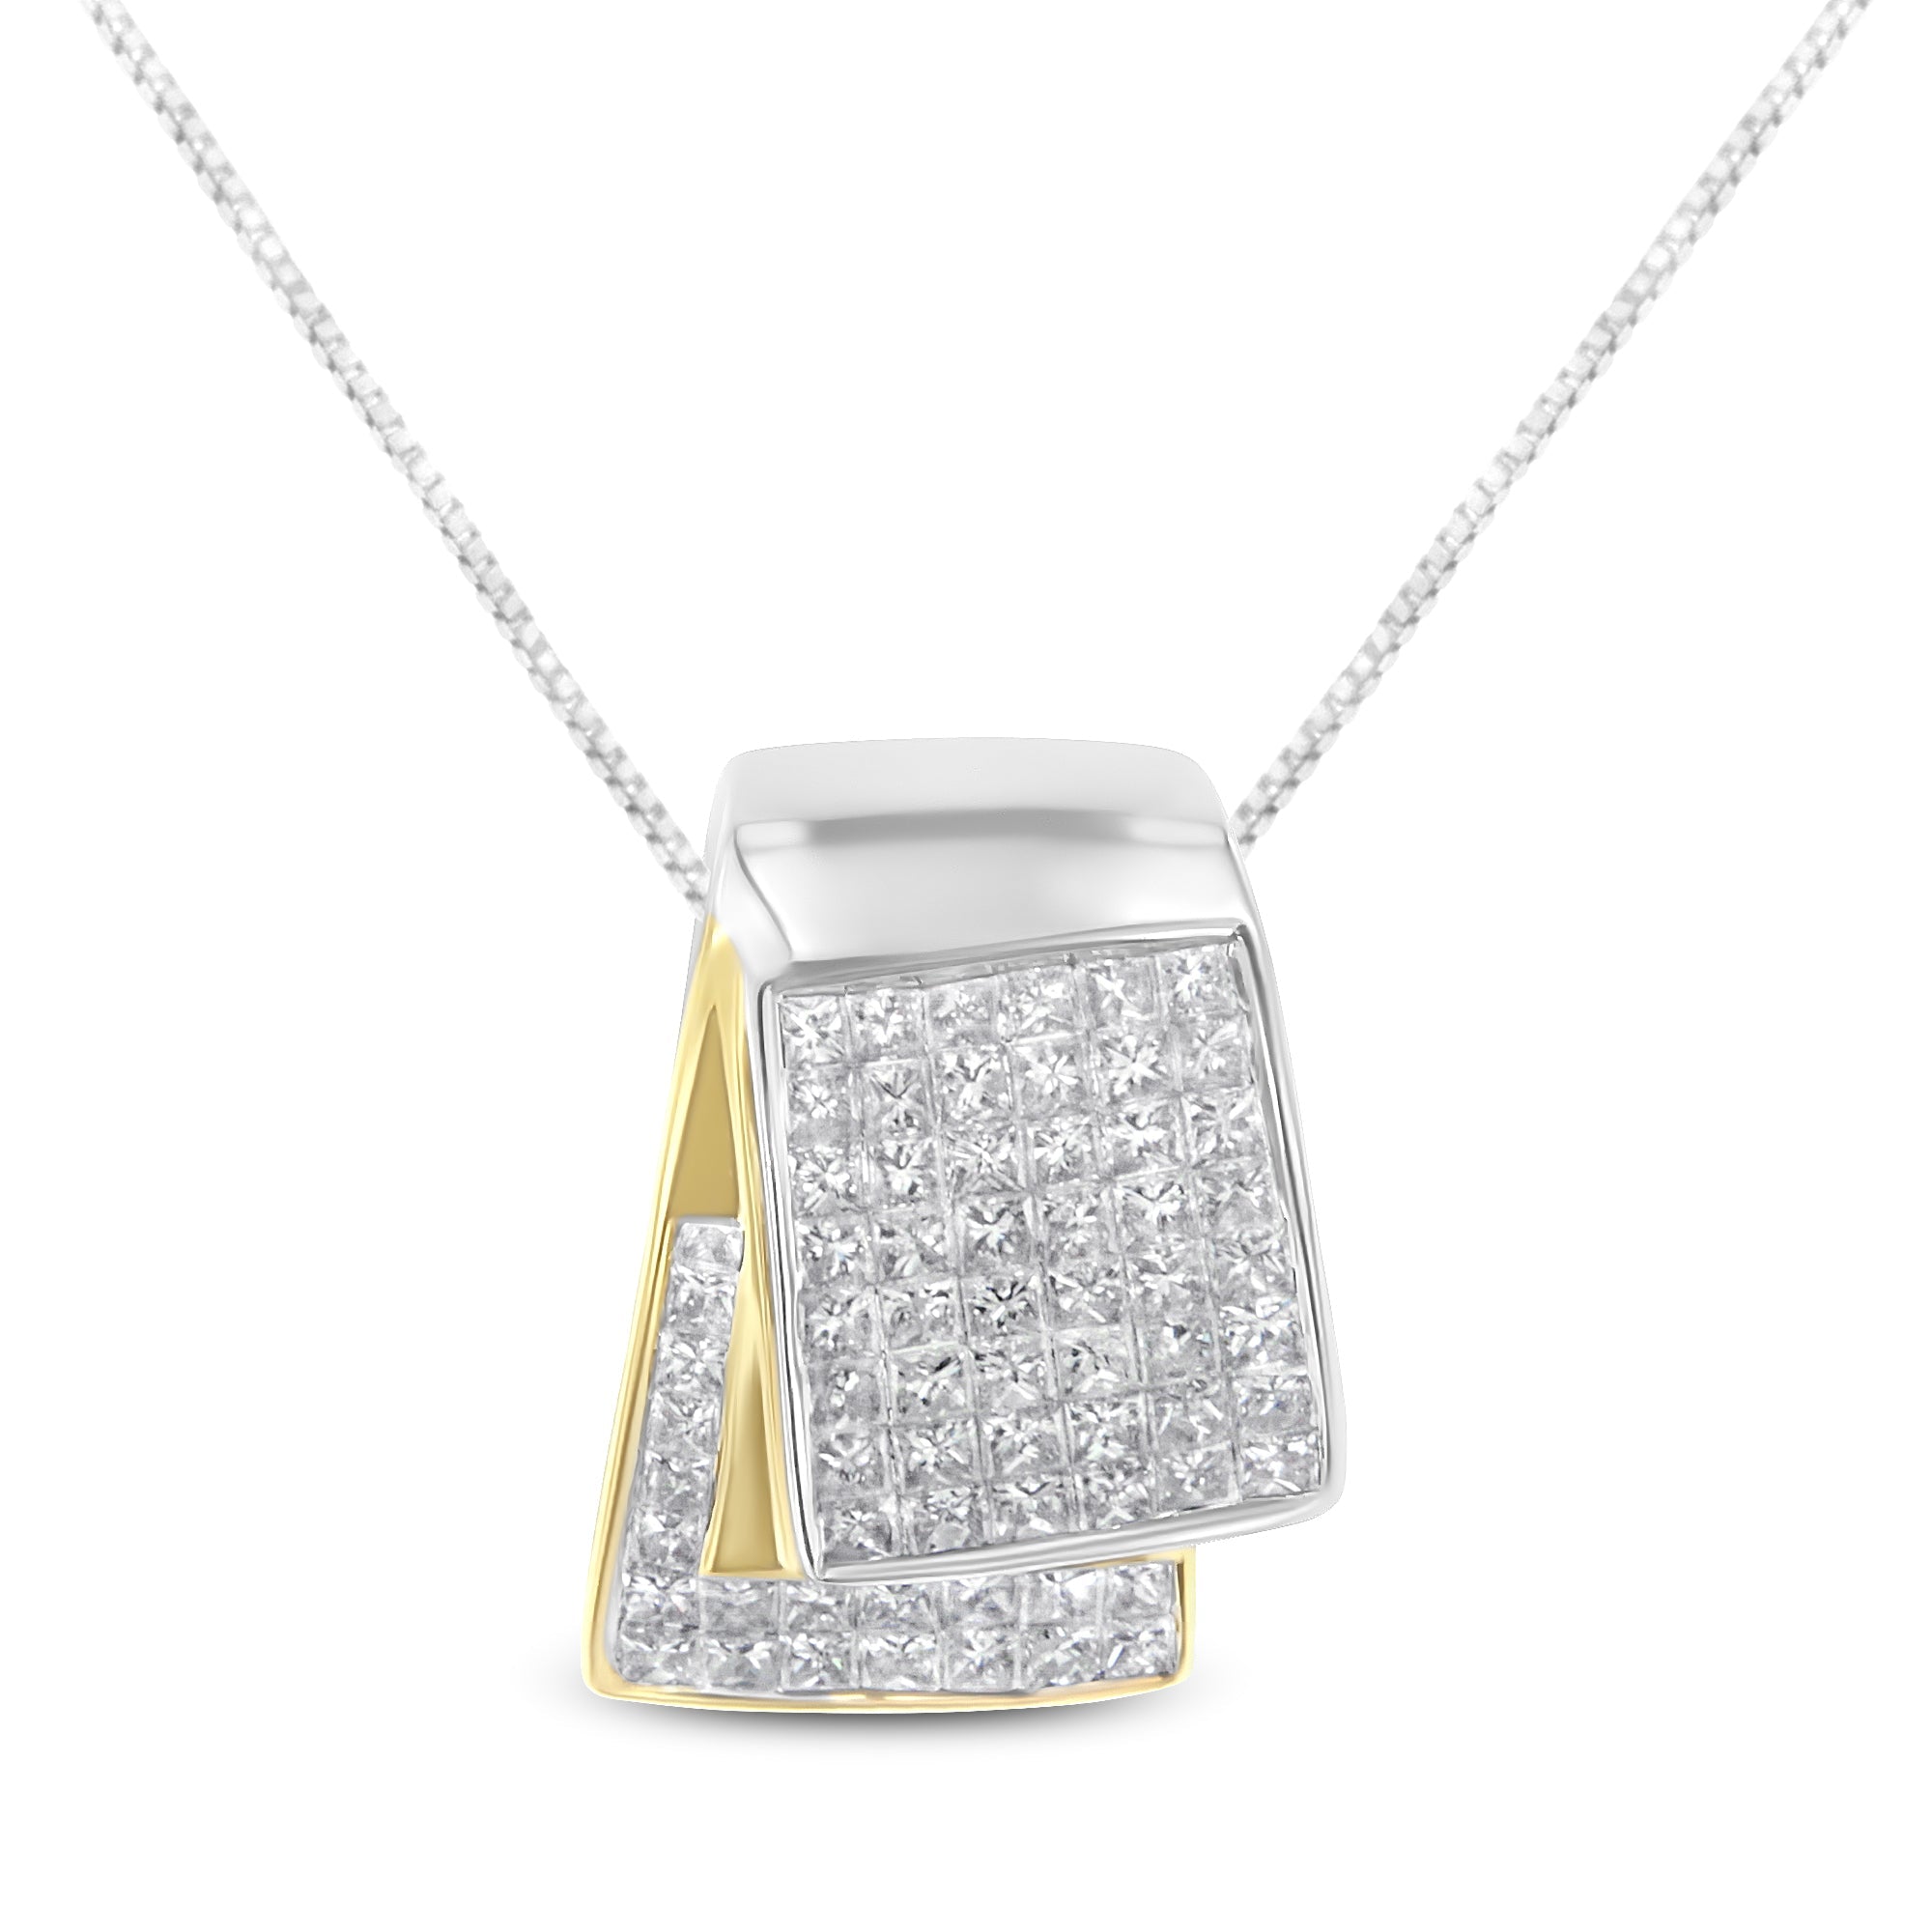 14K-White-And-Yellow-Gold-2.0-Cttw-Princess-Cut-Diamond-Two-Tone-Foldover-Box-Pendant-18”-Box-Chain-Necklace-(H-I-Color,-Si1-Si2-Clarity)-Necklaces